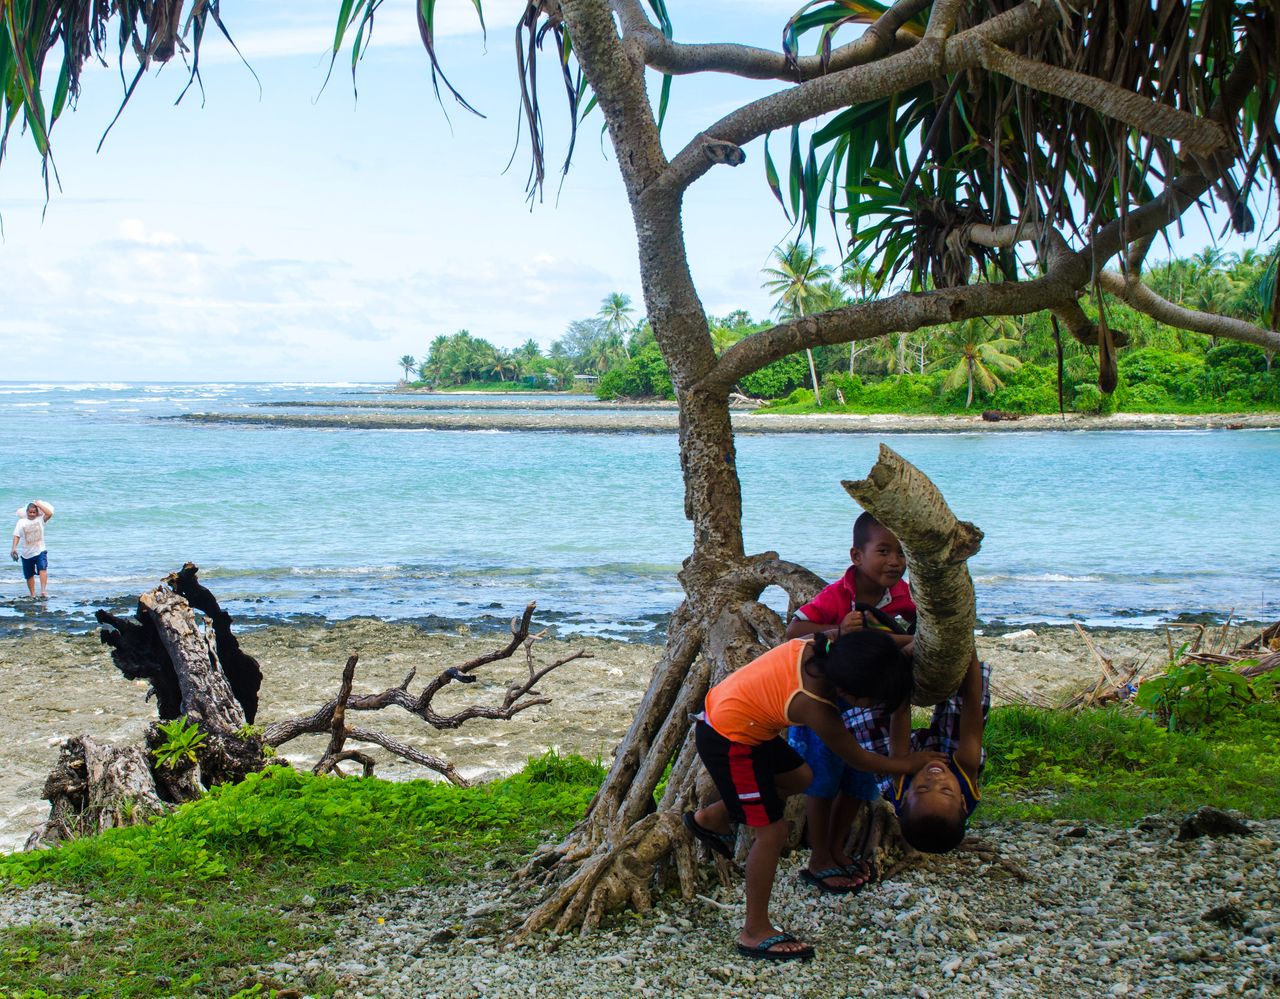 Children play among the branches of a pandanus tree on the coast of Ejit Island.